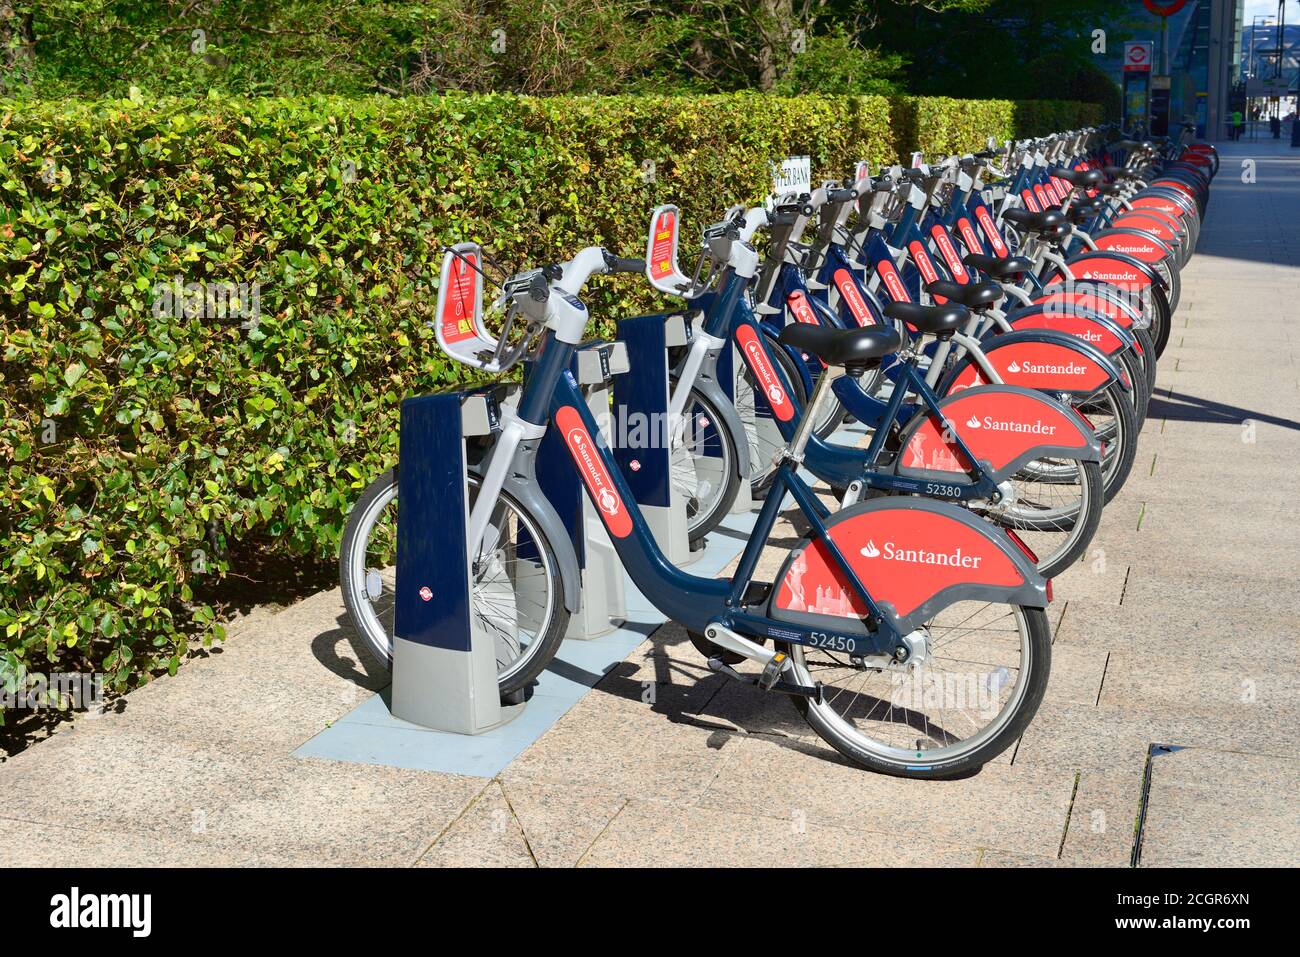 Transport for London and Santander bicycle hire docking station, Upper Bank Street, Canary Wharf, East London, United Kingdom Stock Photo